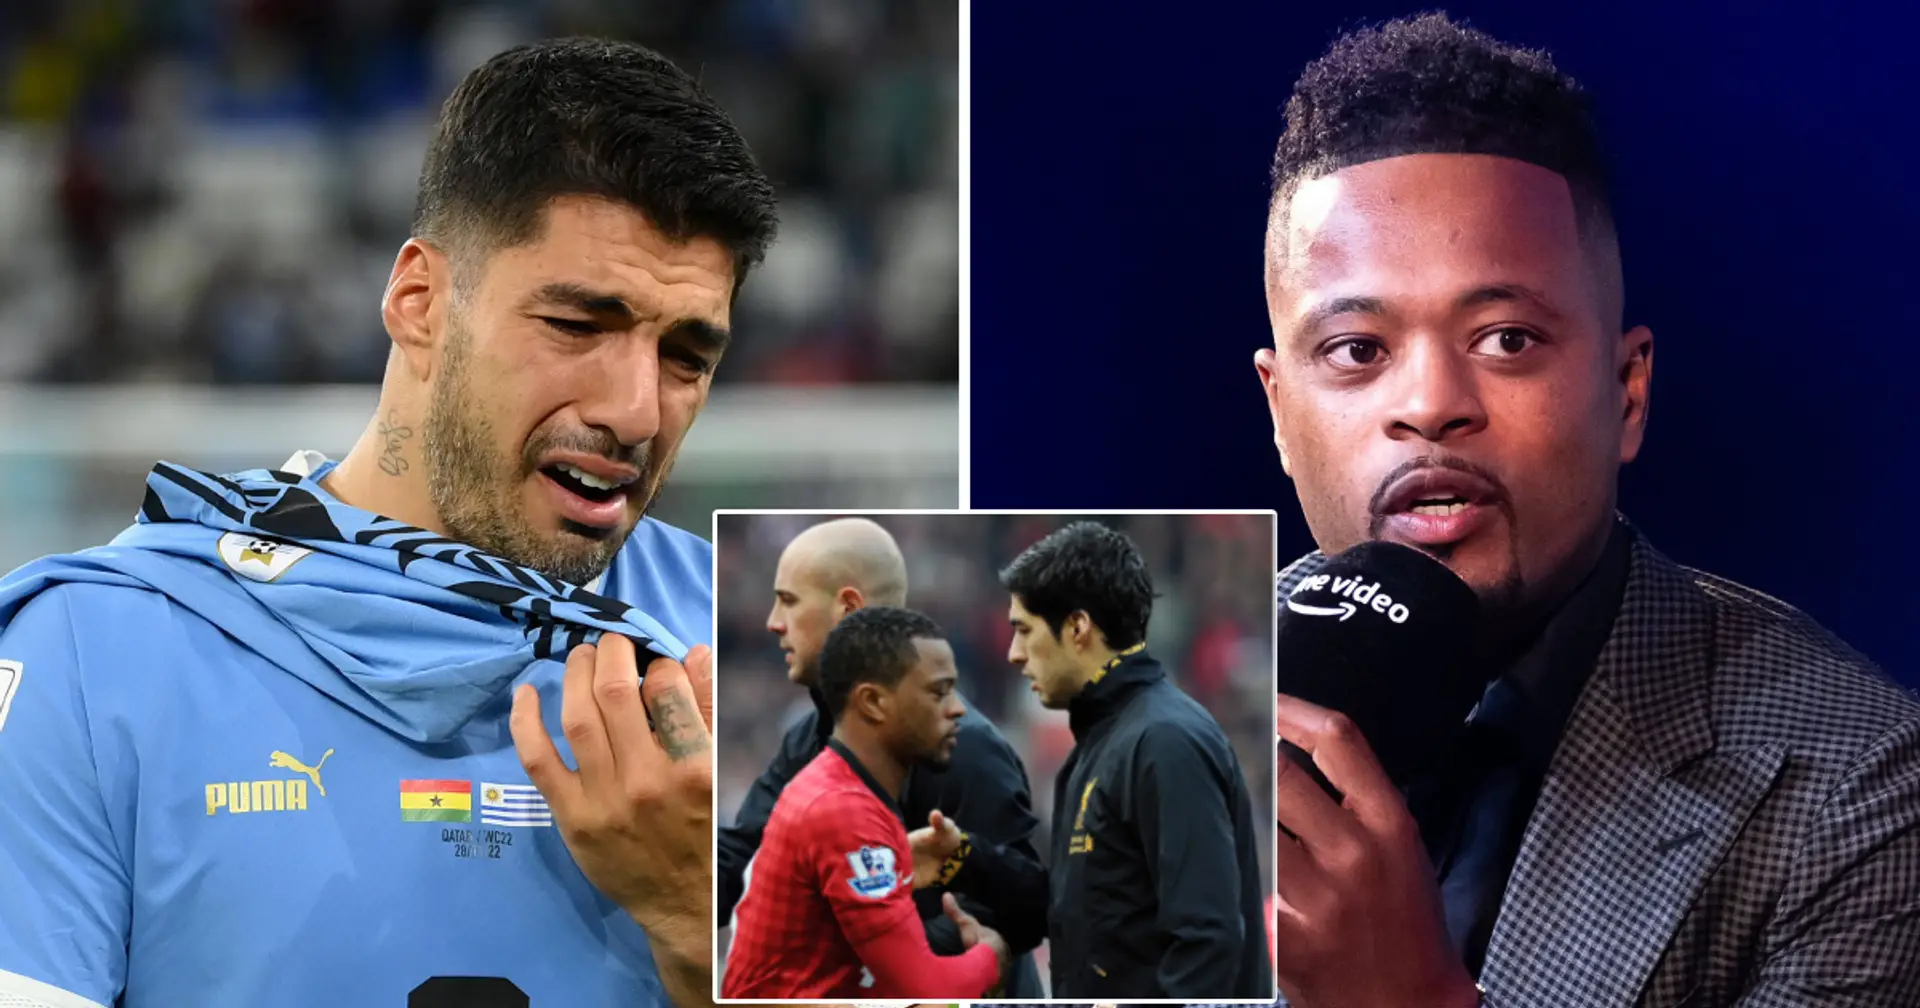 Spotted: Patrice Evra 'likes' photo of crying Luis Suarez after Uruguay exit World Cup